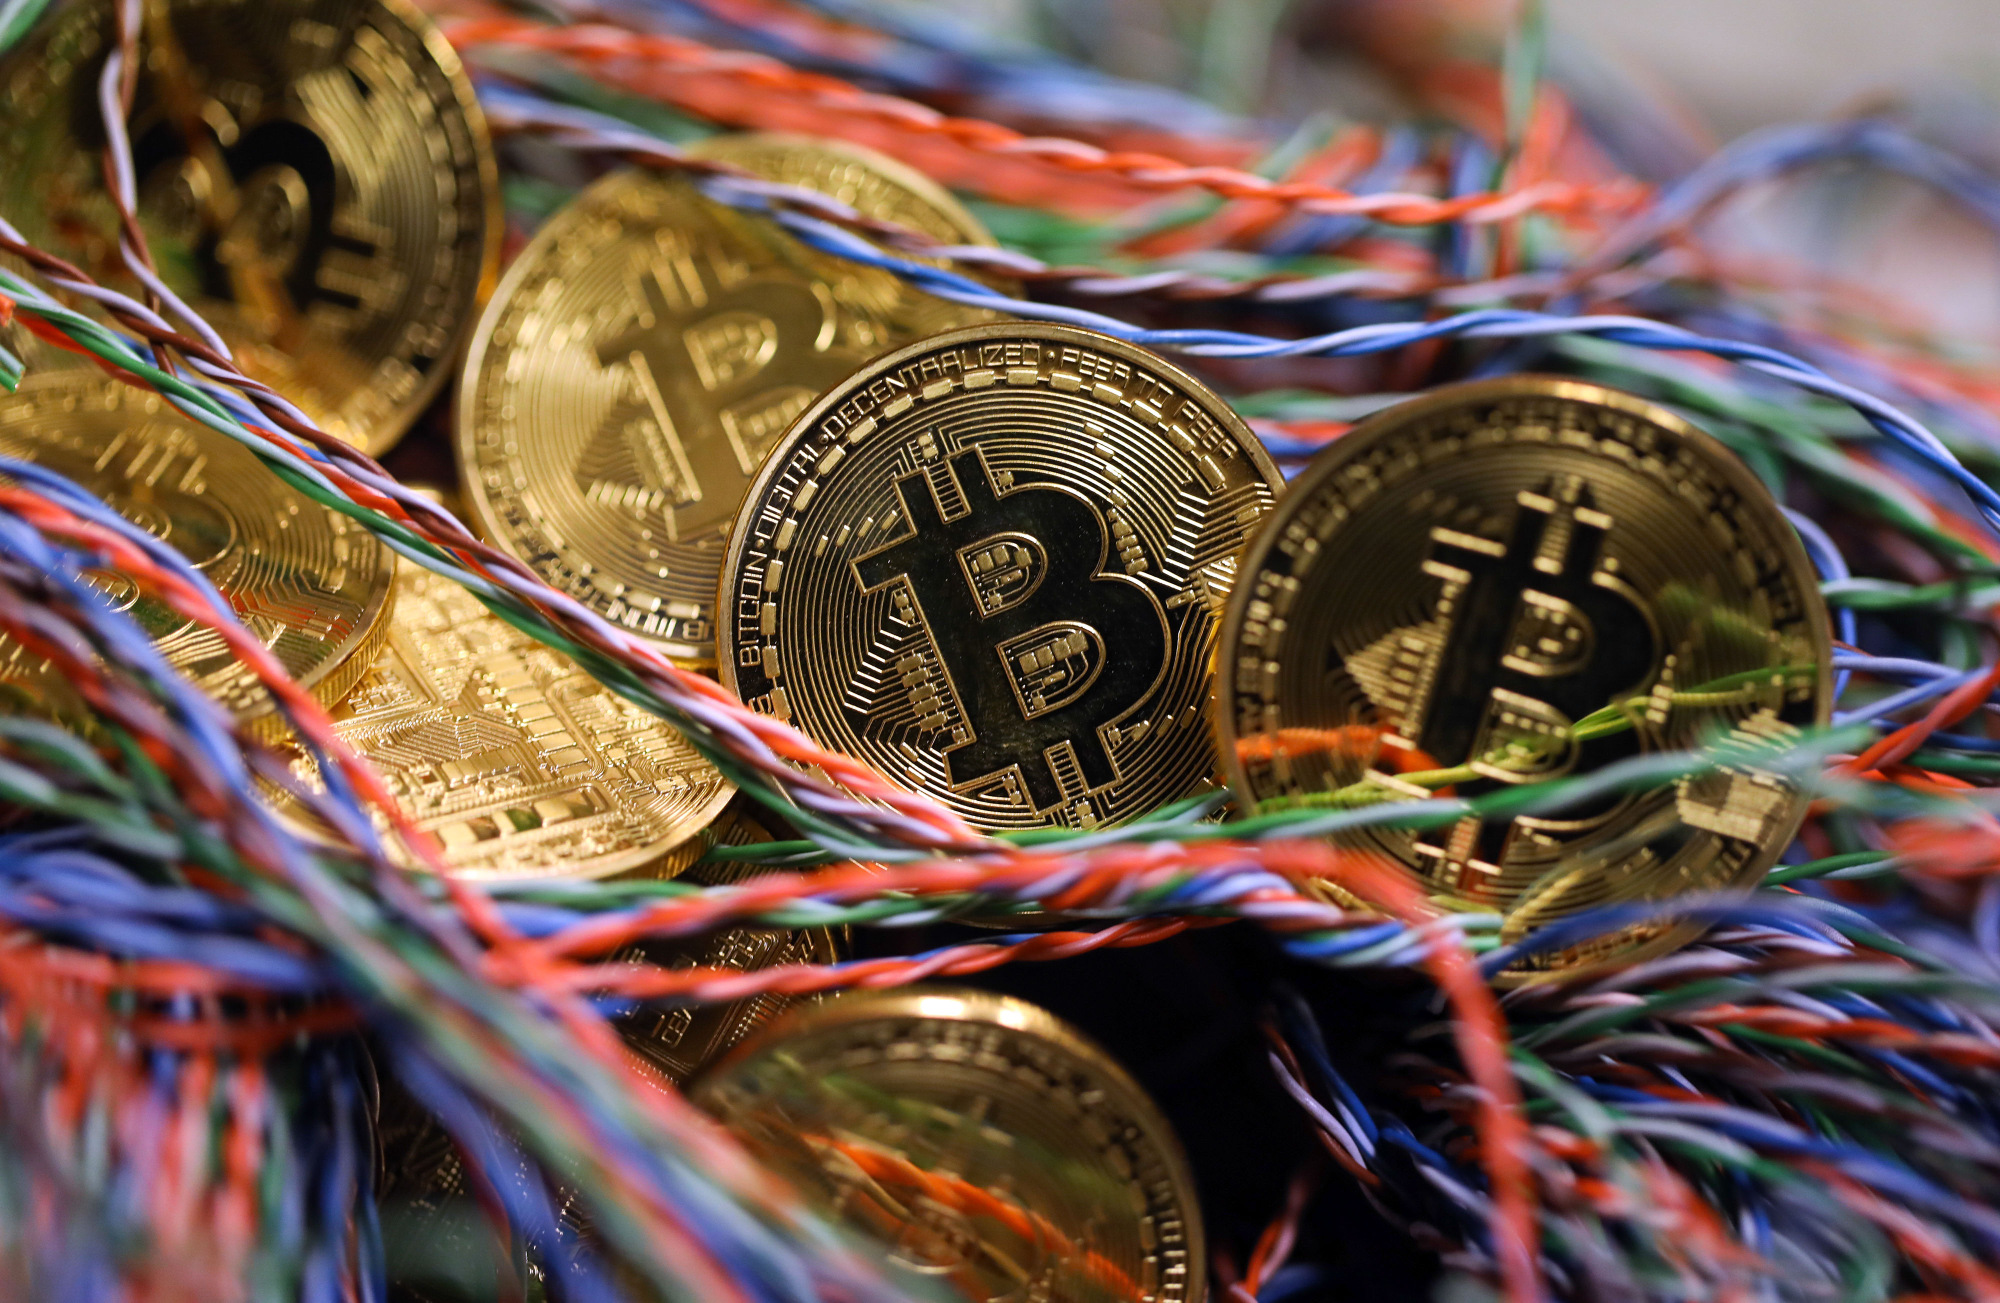 A Bitcoin sits among twisted copper wiring inside a communications room at an office in London, U.K.